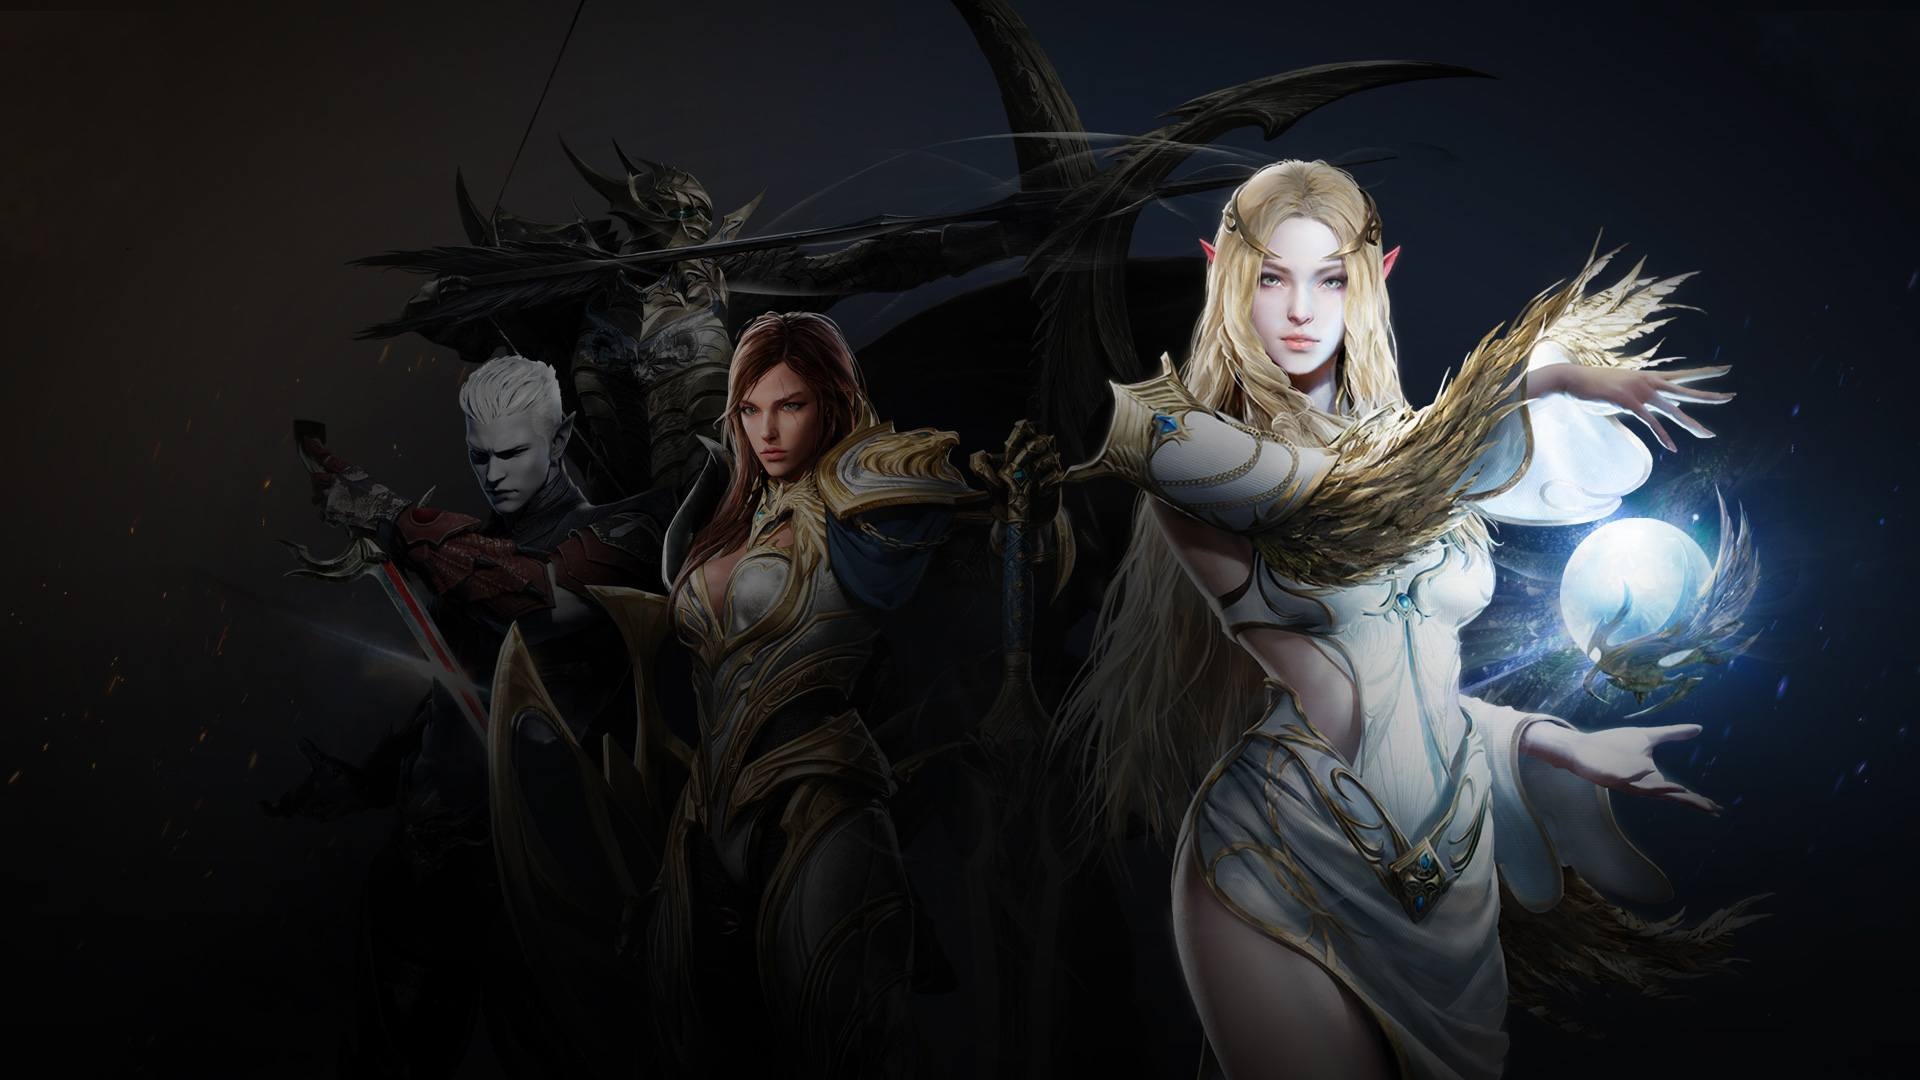 Lineage game, Gaming experts, Play Lineage2m on PC/Mac, Emulator download, 1920x1080 Full HD Desktop